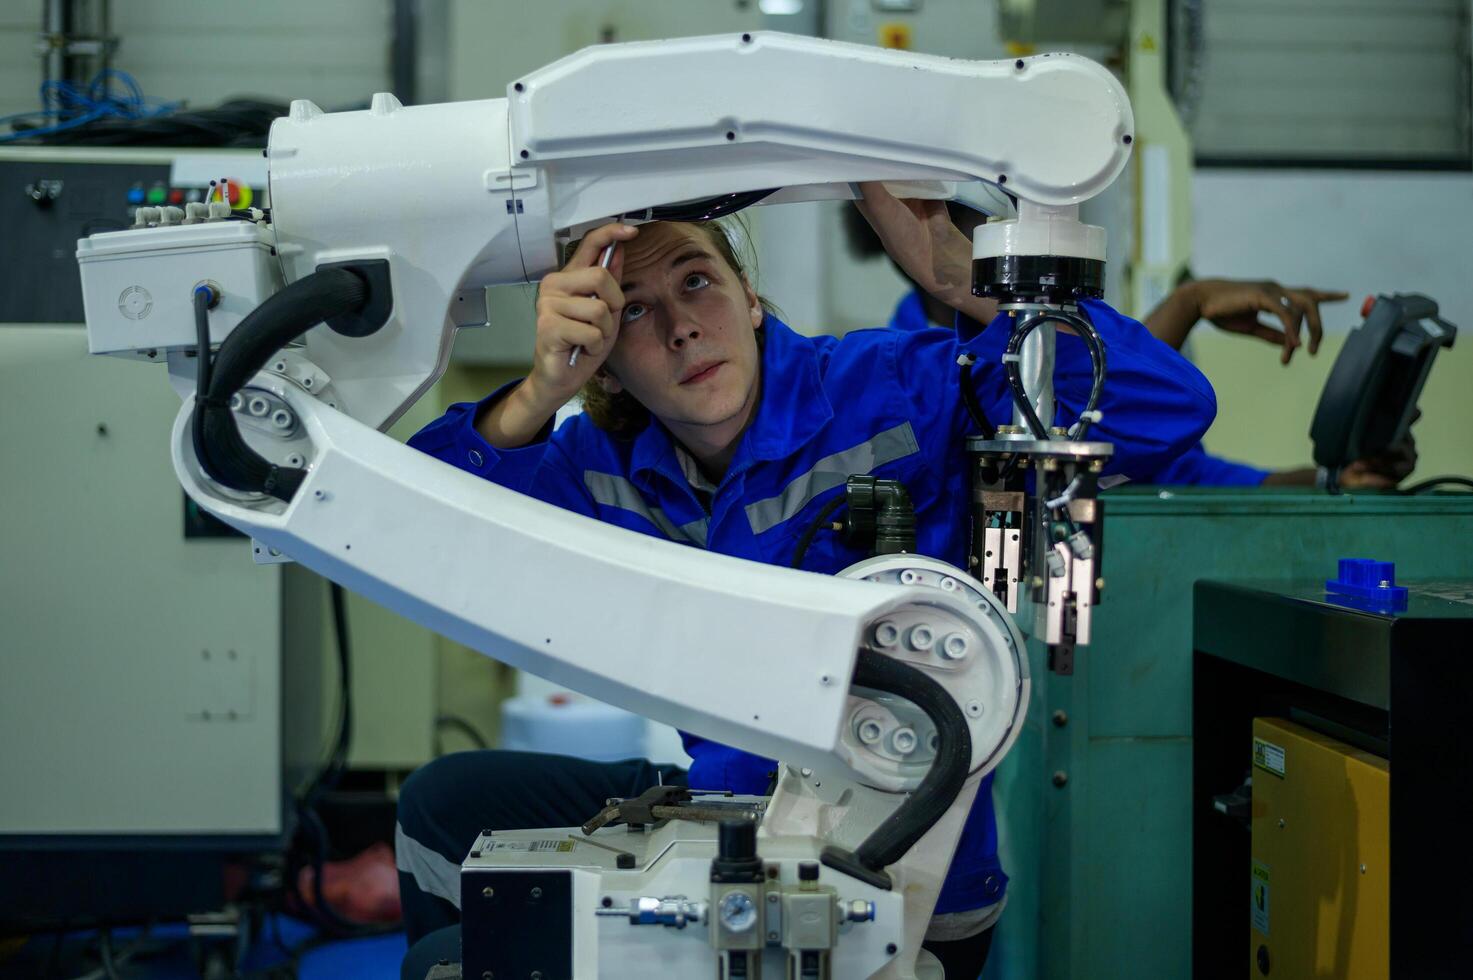 Male Robotics engineer working with Programming and Manipulating Robot Hand, Industrial Robotics Design, High Tech Facility, Modern Machine Learning. Mass Production Automatics. photo